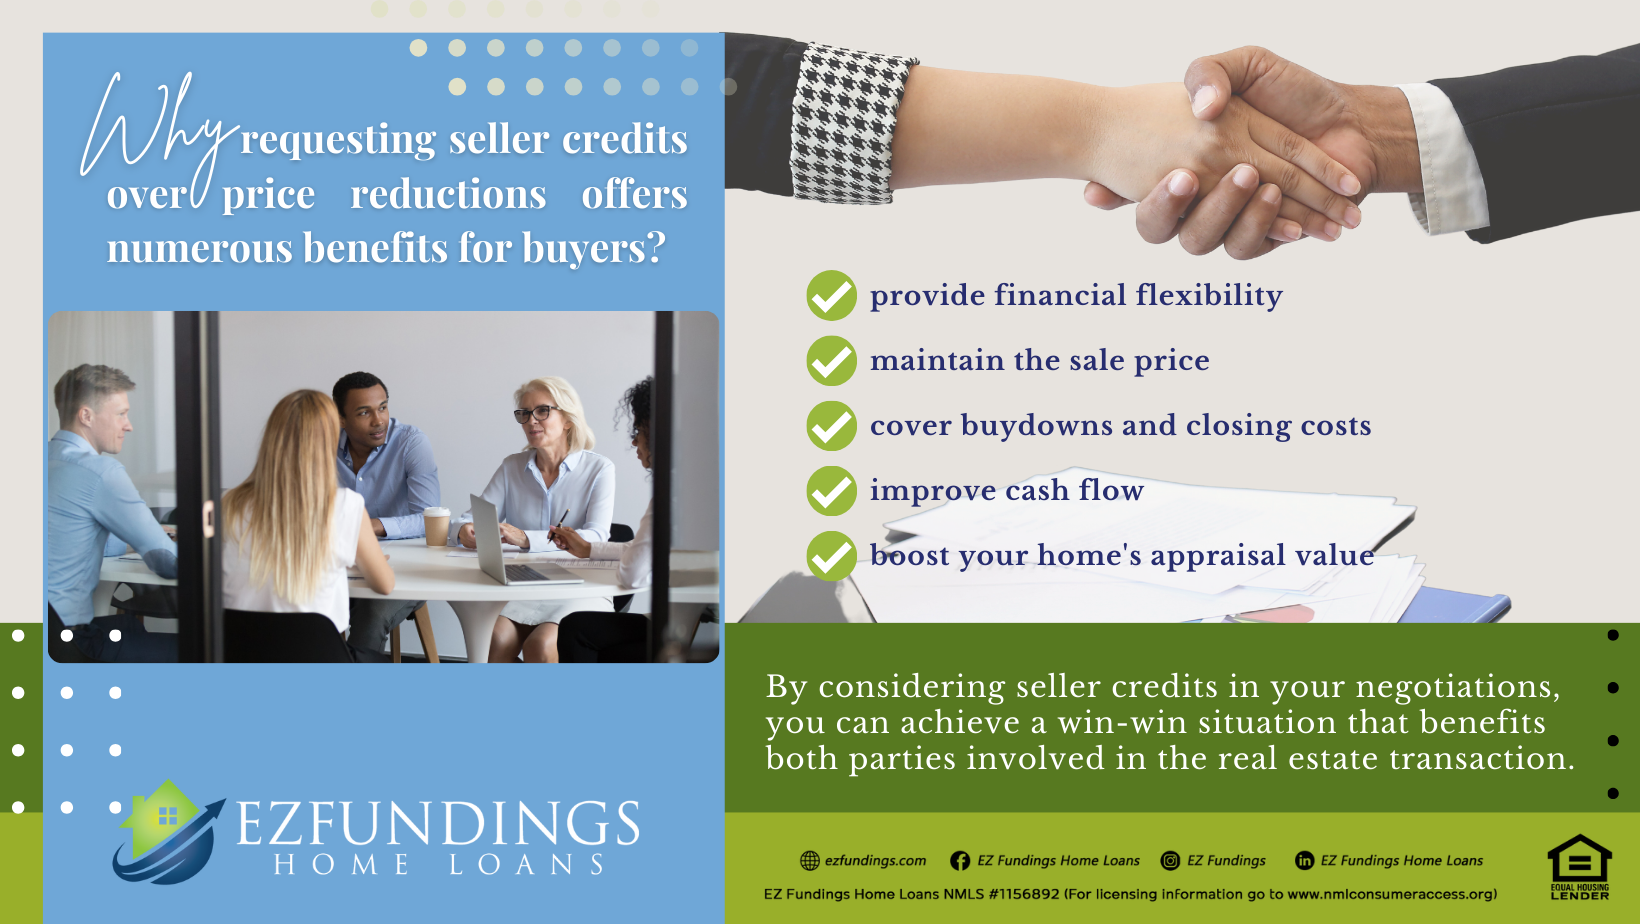 The image shows buyers negotiating with sellers. The text also says "Why requesting seller credits over price reductions offers numerous benefits for buyers? Bullet points include: provide financial flexibility, maintain the sale price, cover buydowns and closing costs, improve cash flow, and boost your home's appraisal value. And by considering seller credits in your negotiations, you can achieve a win-win situation that benefits both parties involved in the real estate transaction.